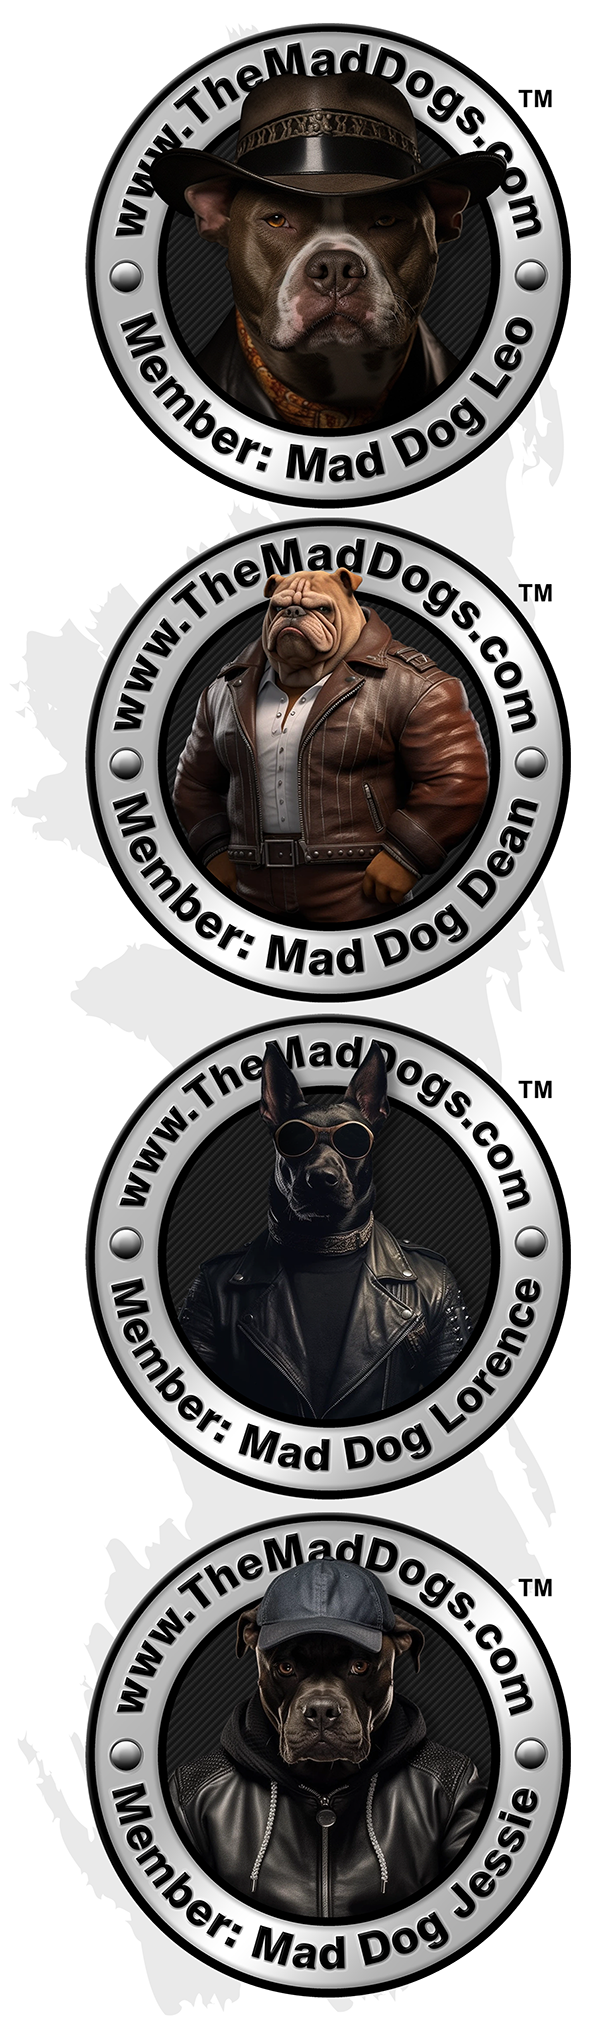 We are The Mad Dogs!